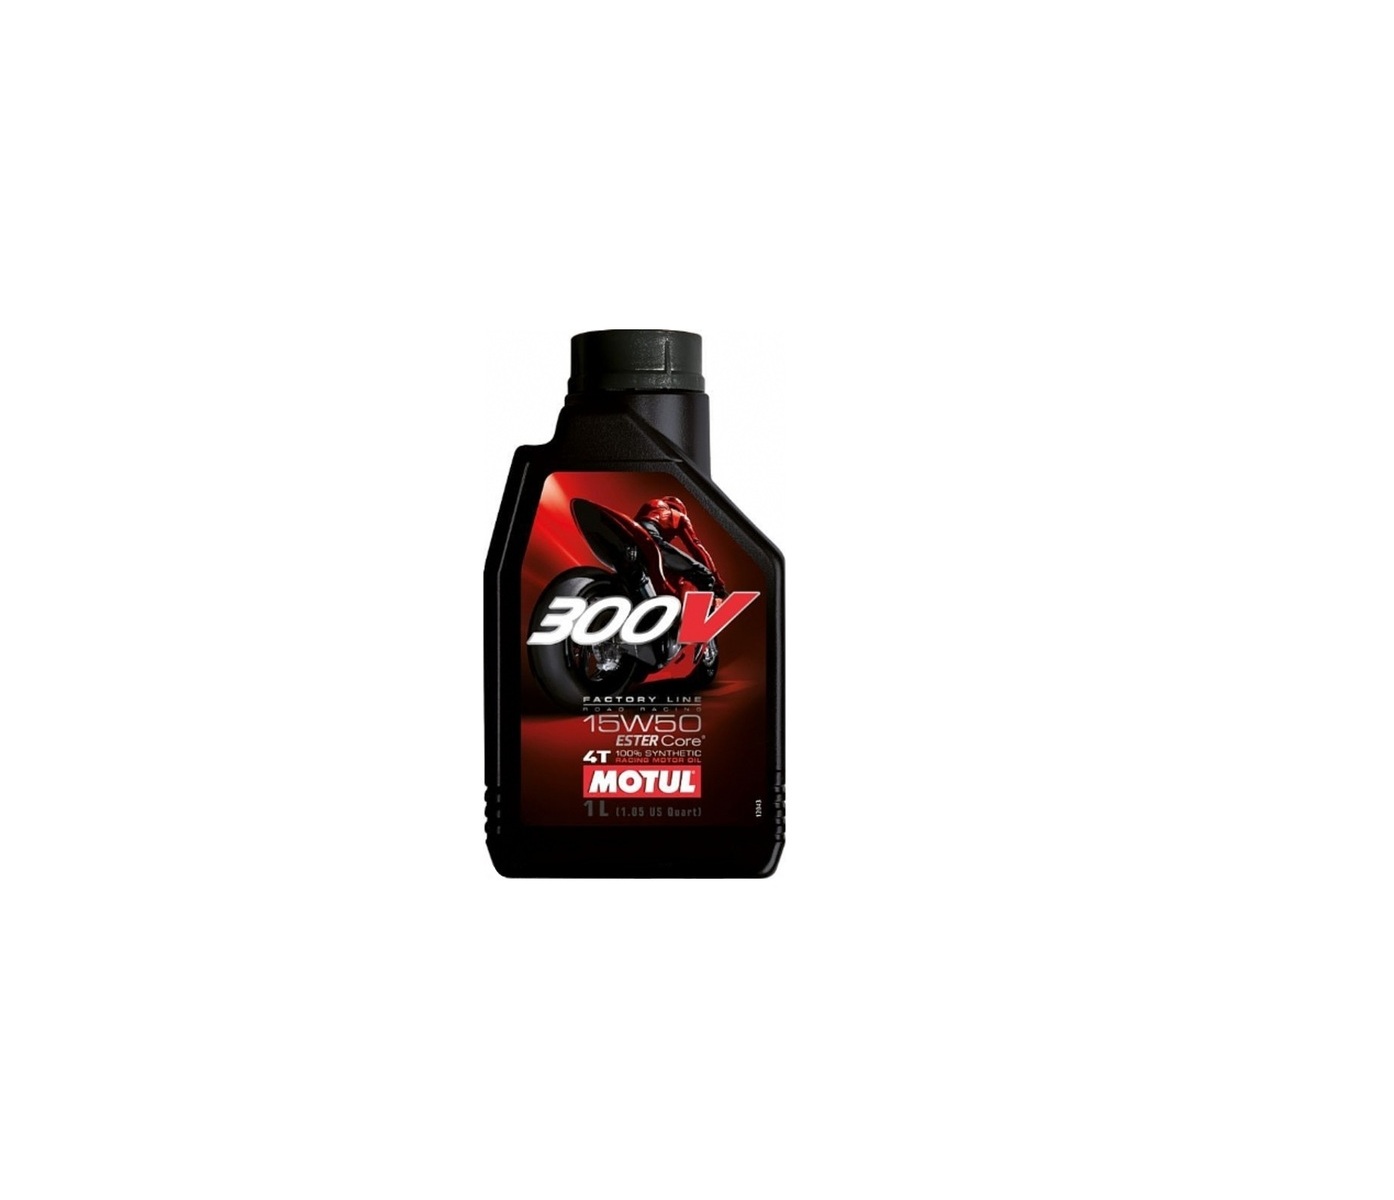 <span style="font-weight: bold;">Масло моторное MOTUL 300V 15W-50 4Т, 1 л.</span><br>